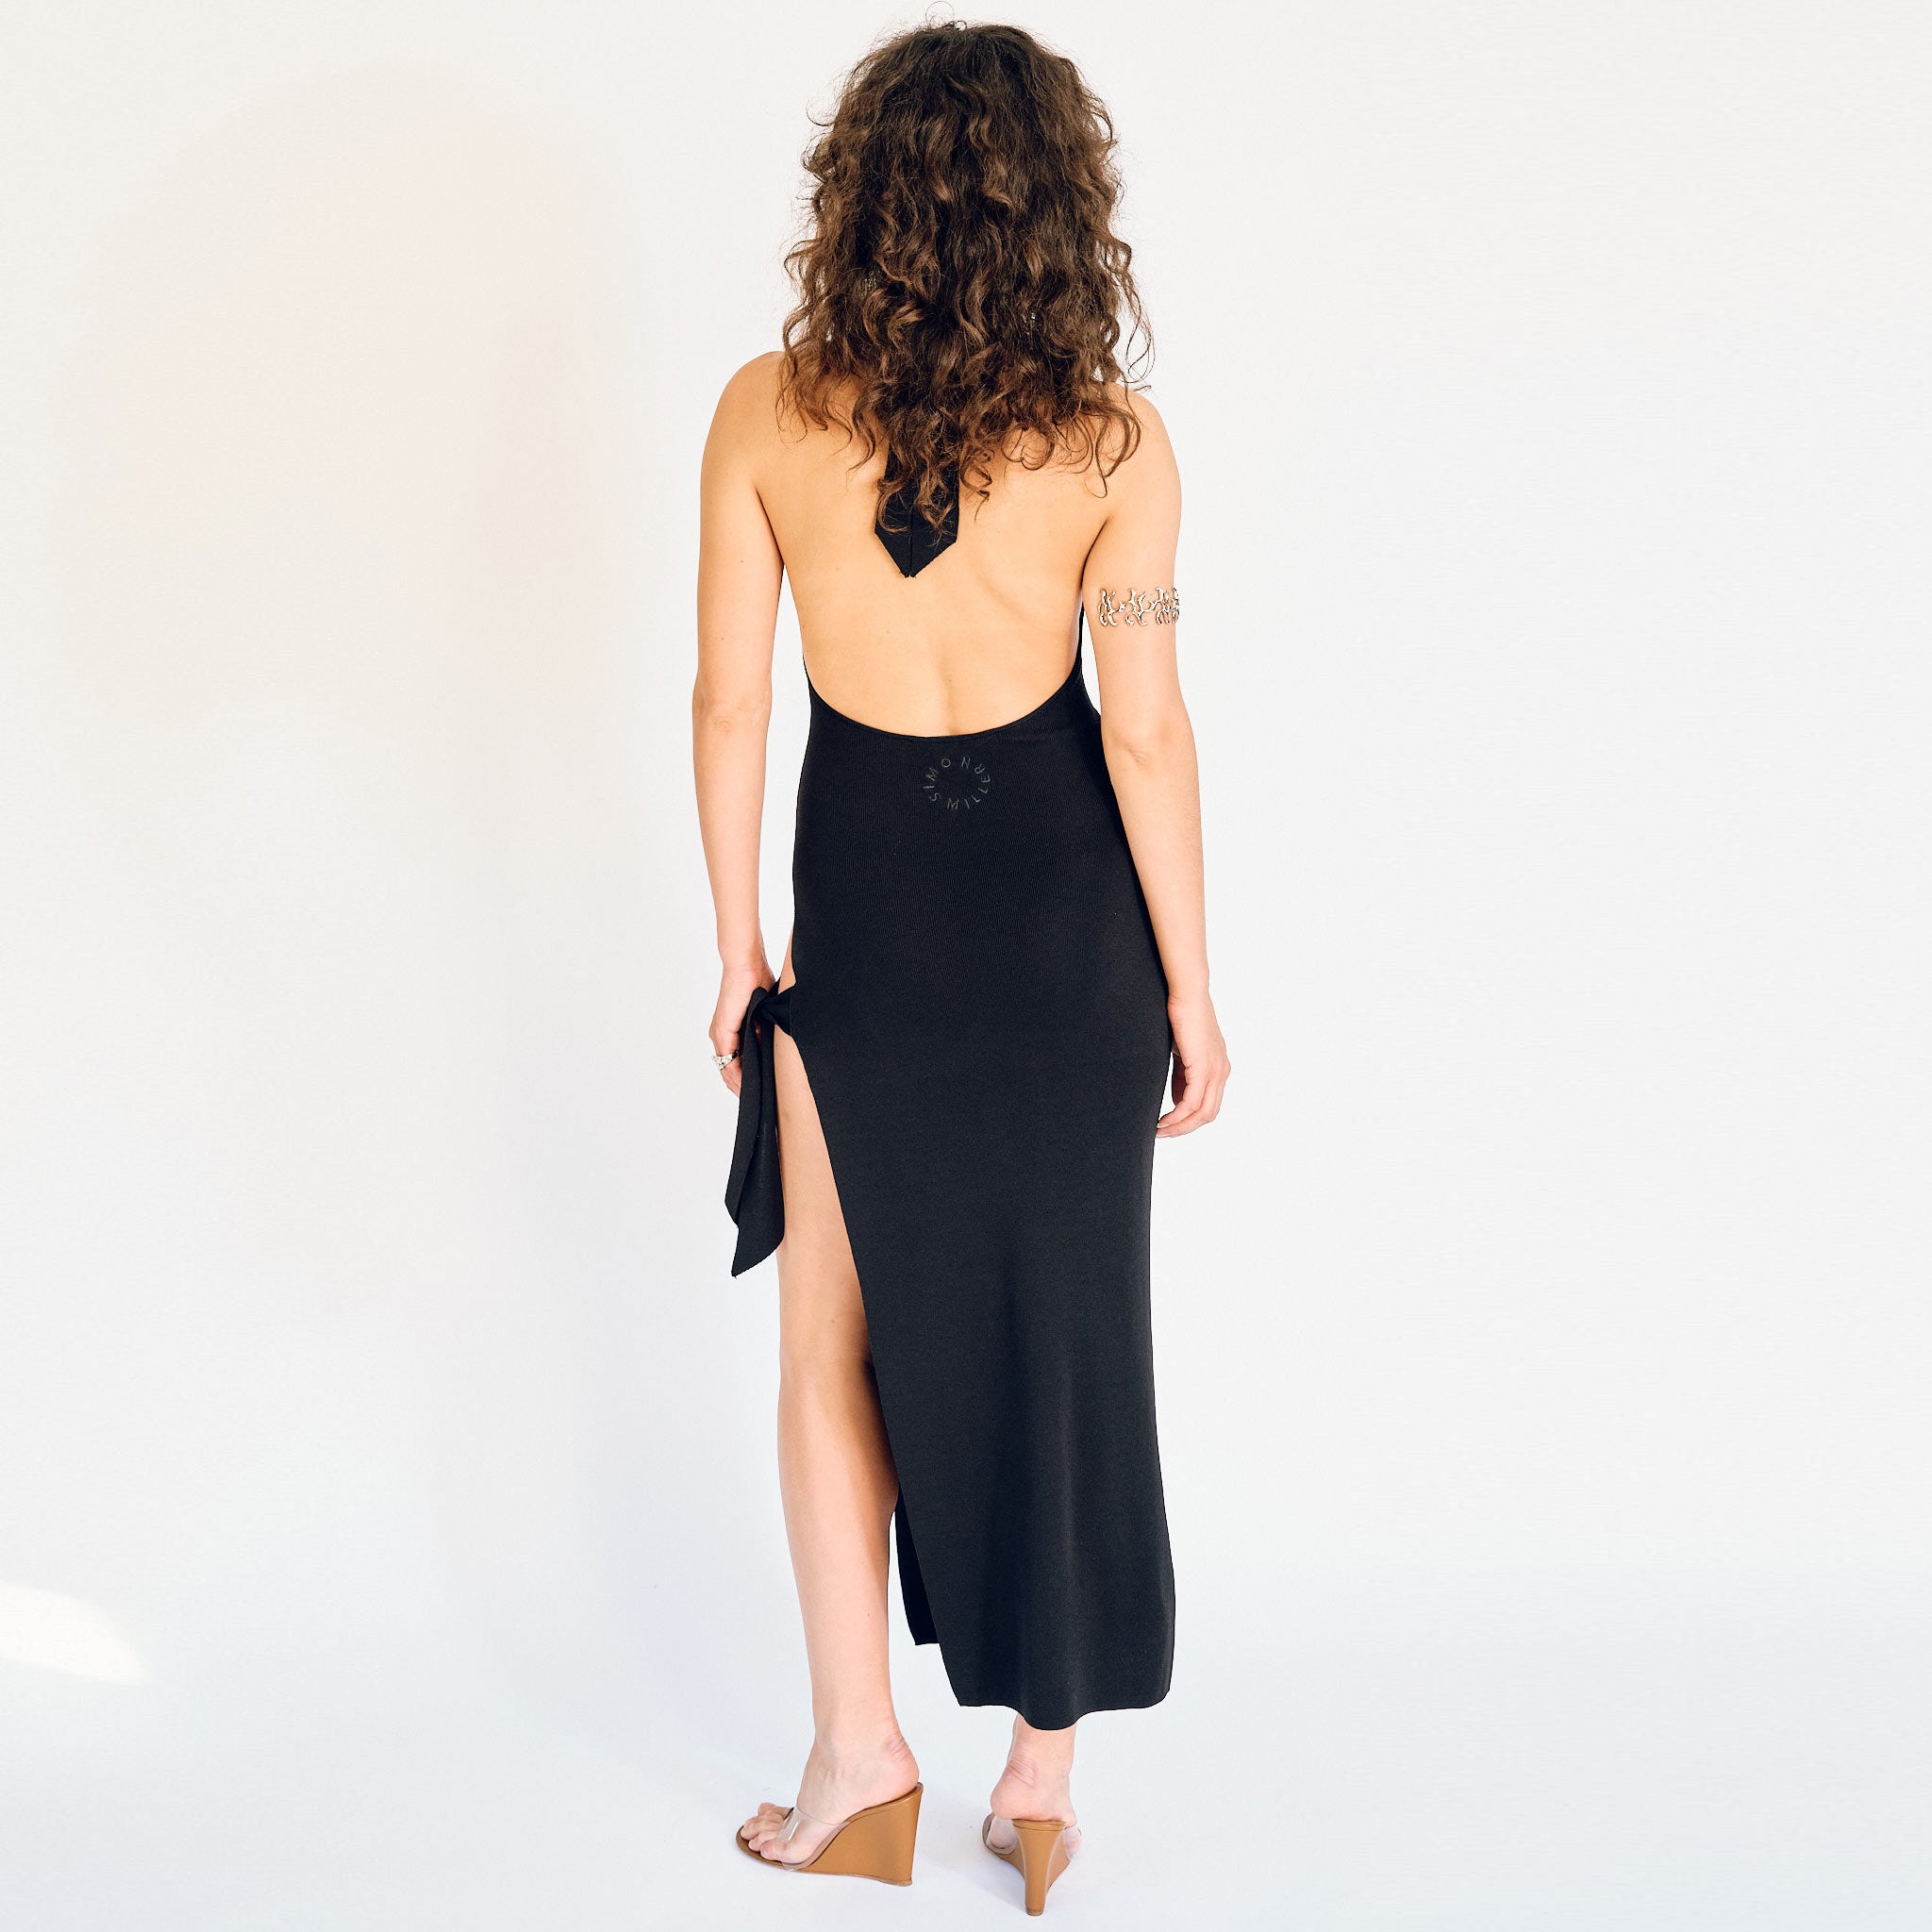 A model wears the Simon Miller Junjo tank style dress in black, with high side slits along the left leg - back view showing low back.